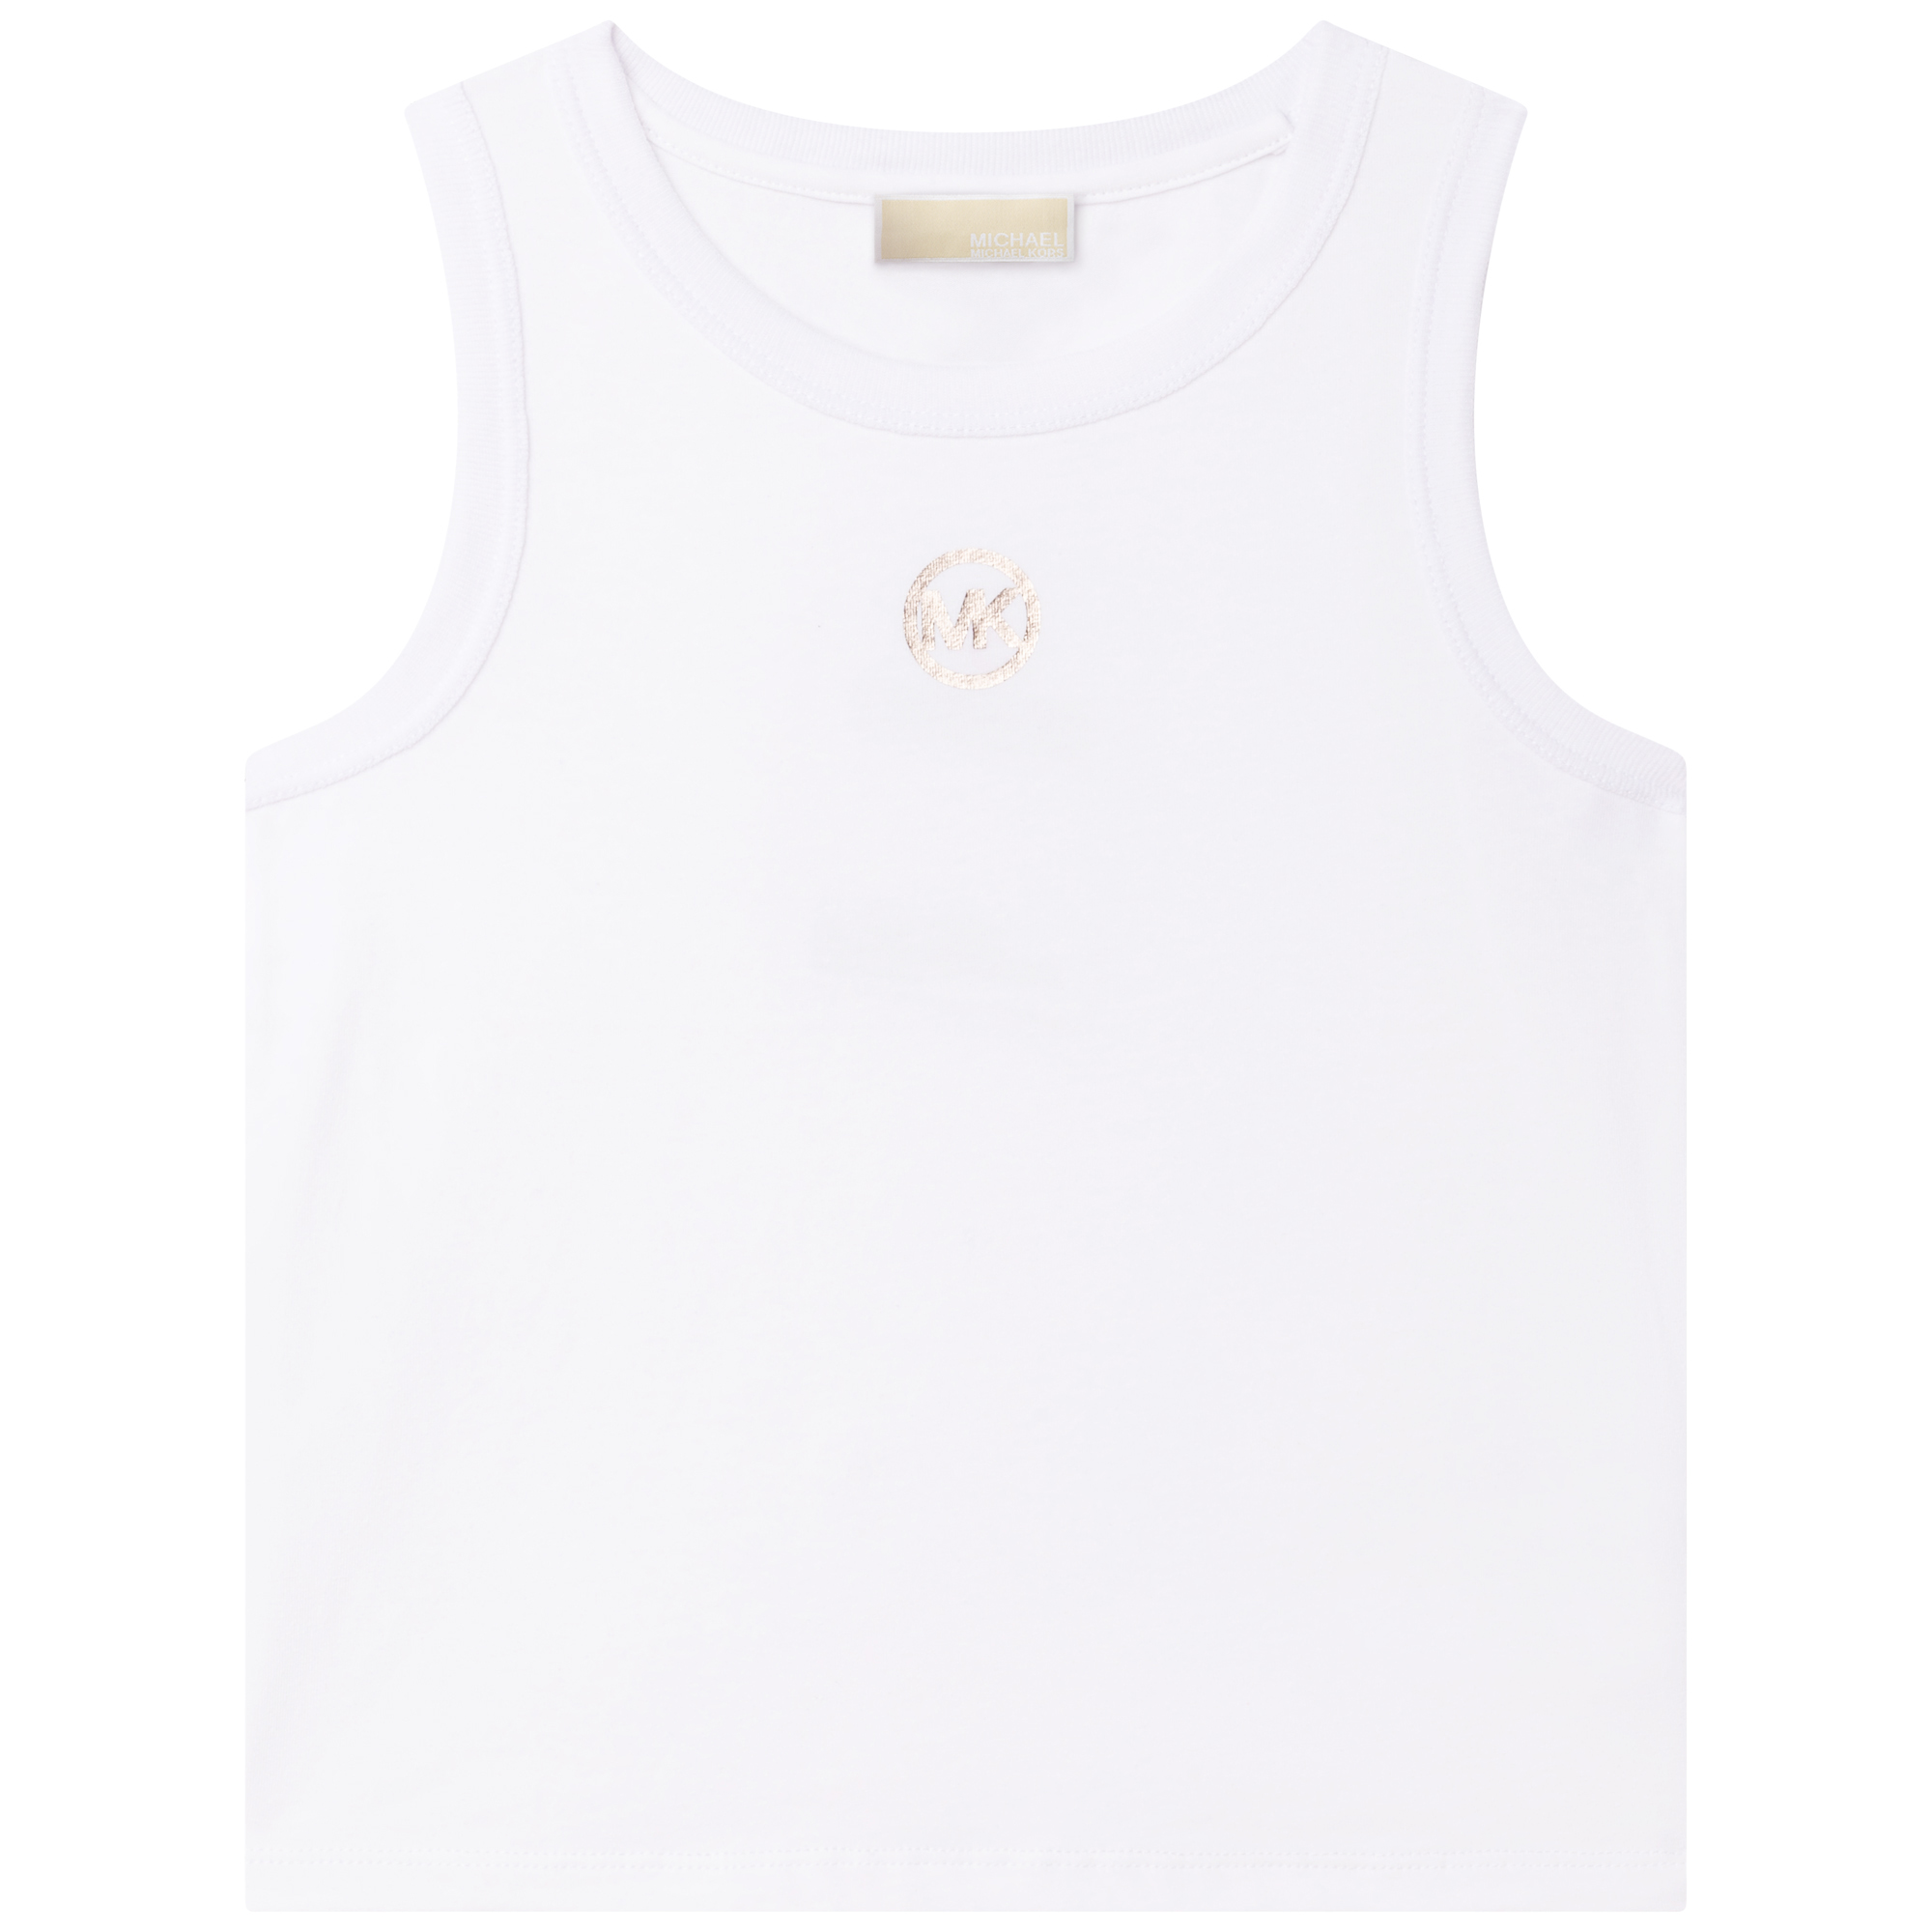 Vest top with logo MICHAEL KORS for GIRL